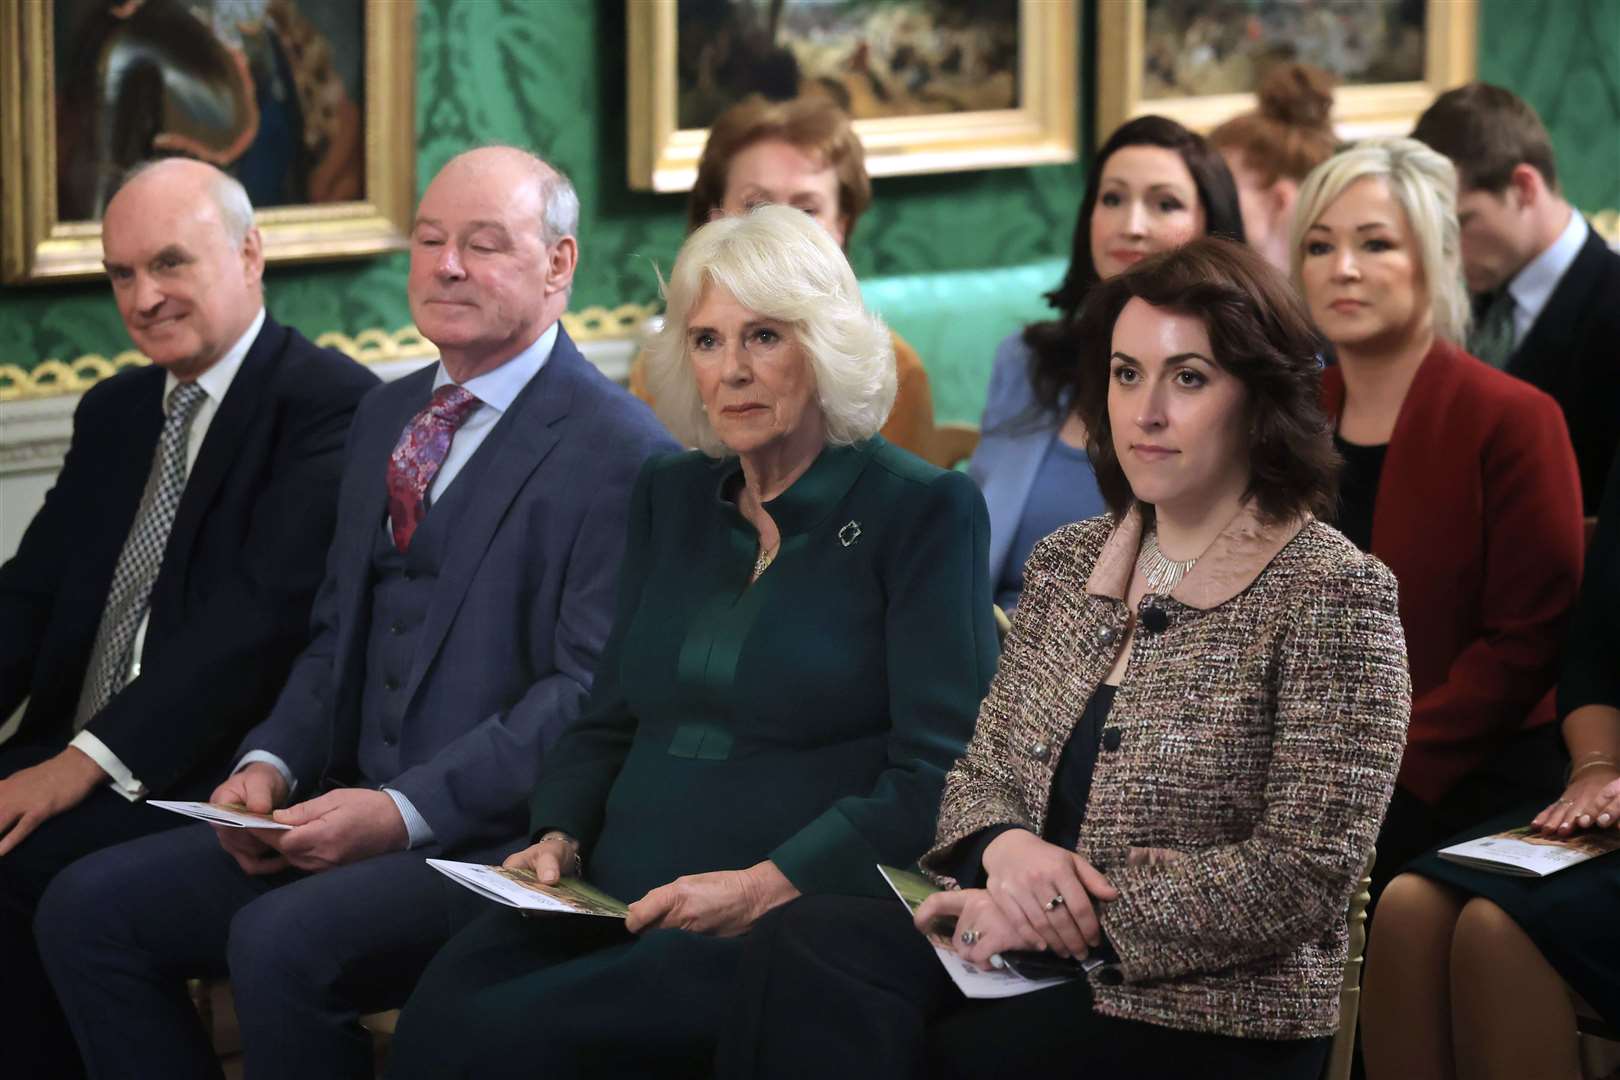 Camilla attends an event hosted by the Queen’s Reading Room to mark World Poetry Day at Hillsborough Castle (Liam McBurney/PA)